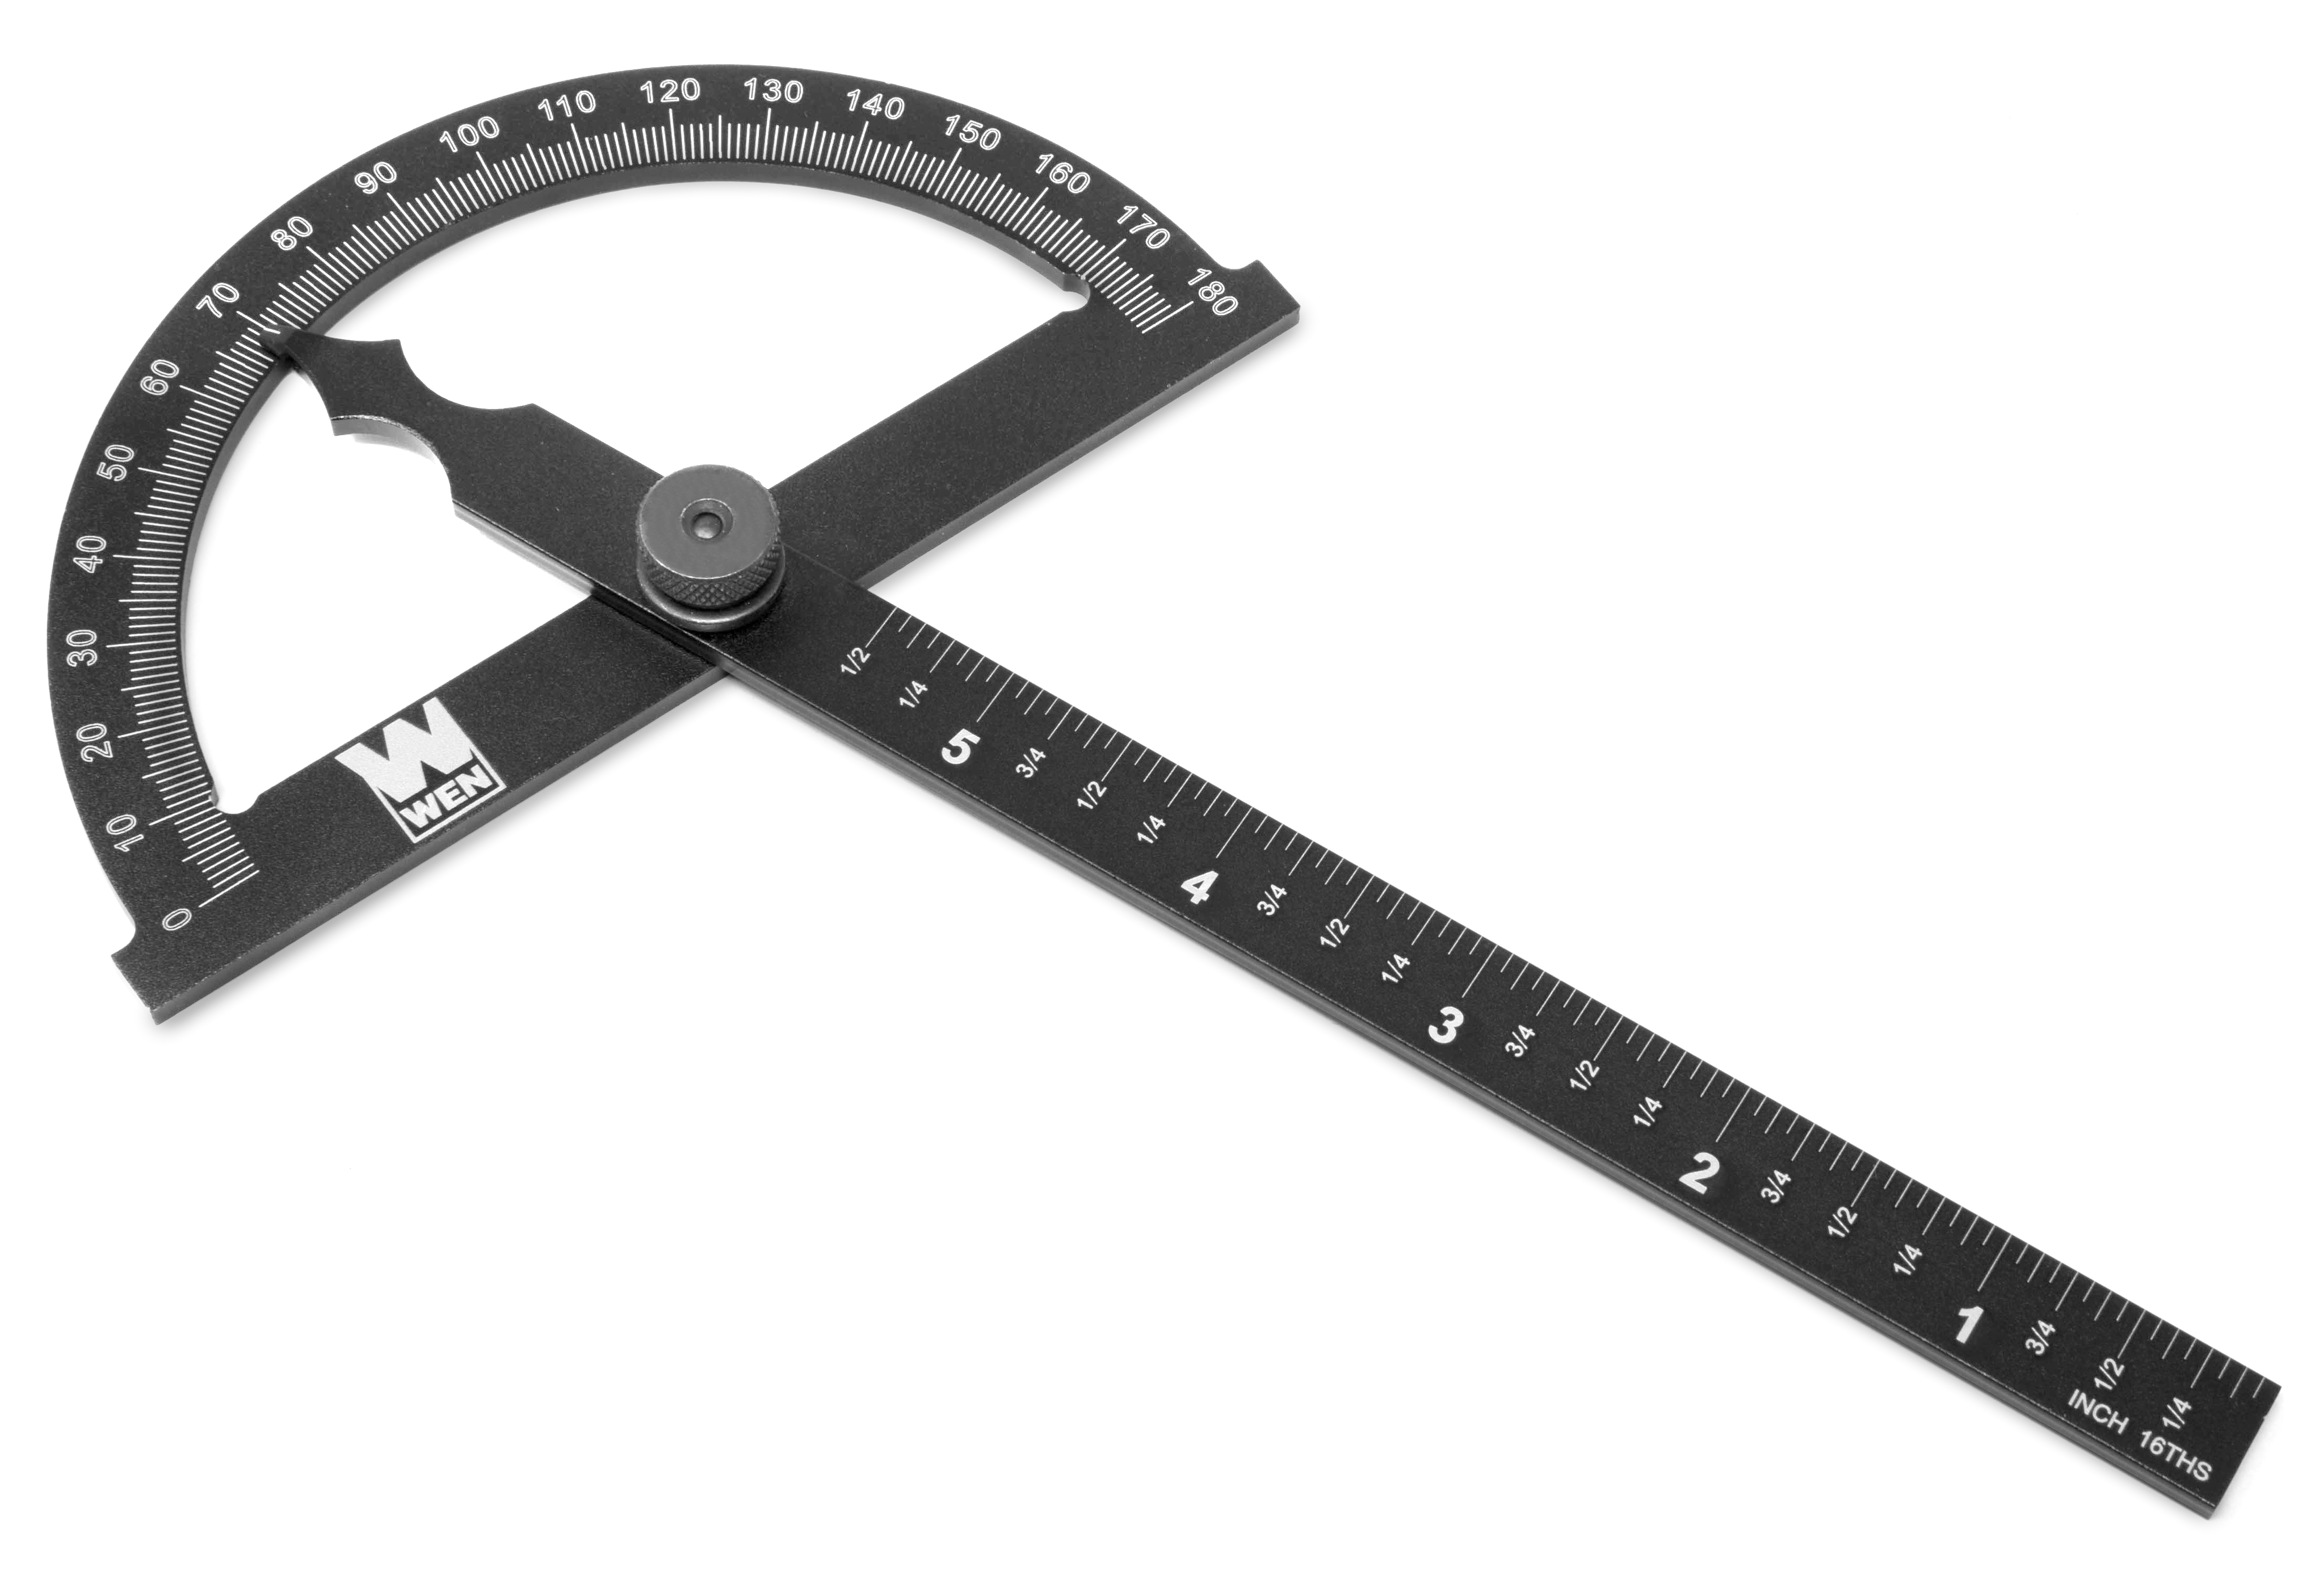 WEN Adjustable Aluminum Protractor and Angle Gauge with Laser Etched Scale - image 1 of 5